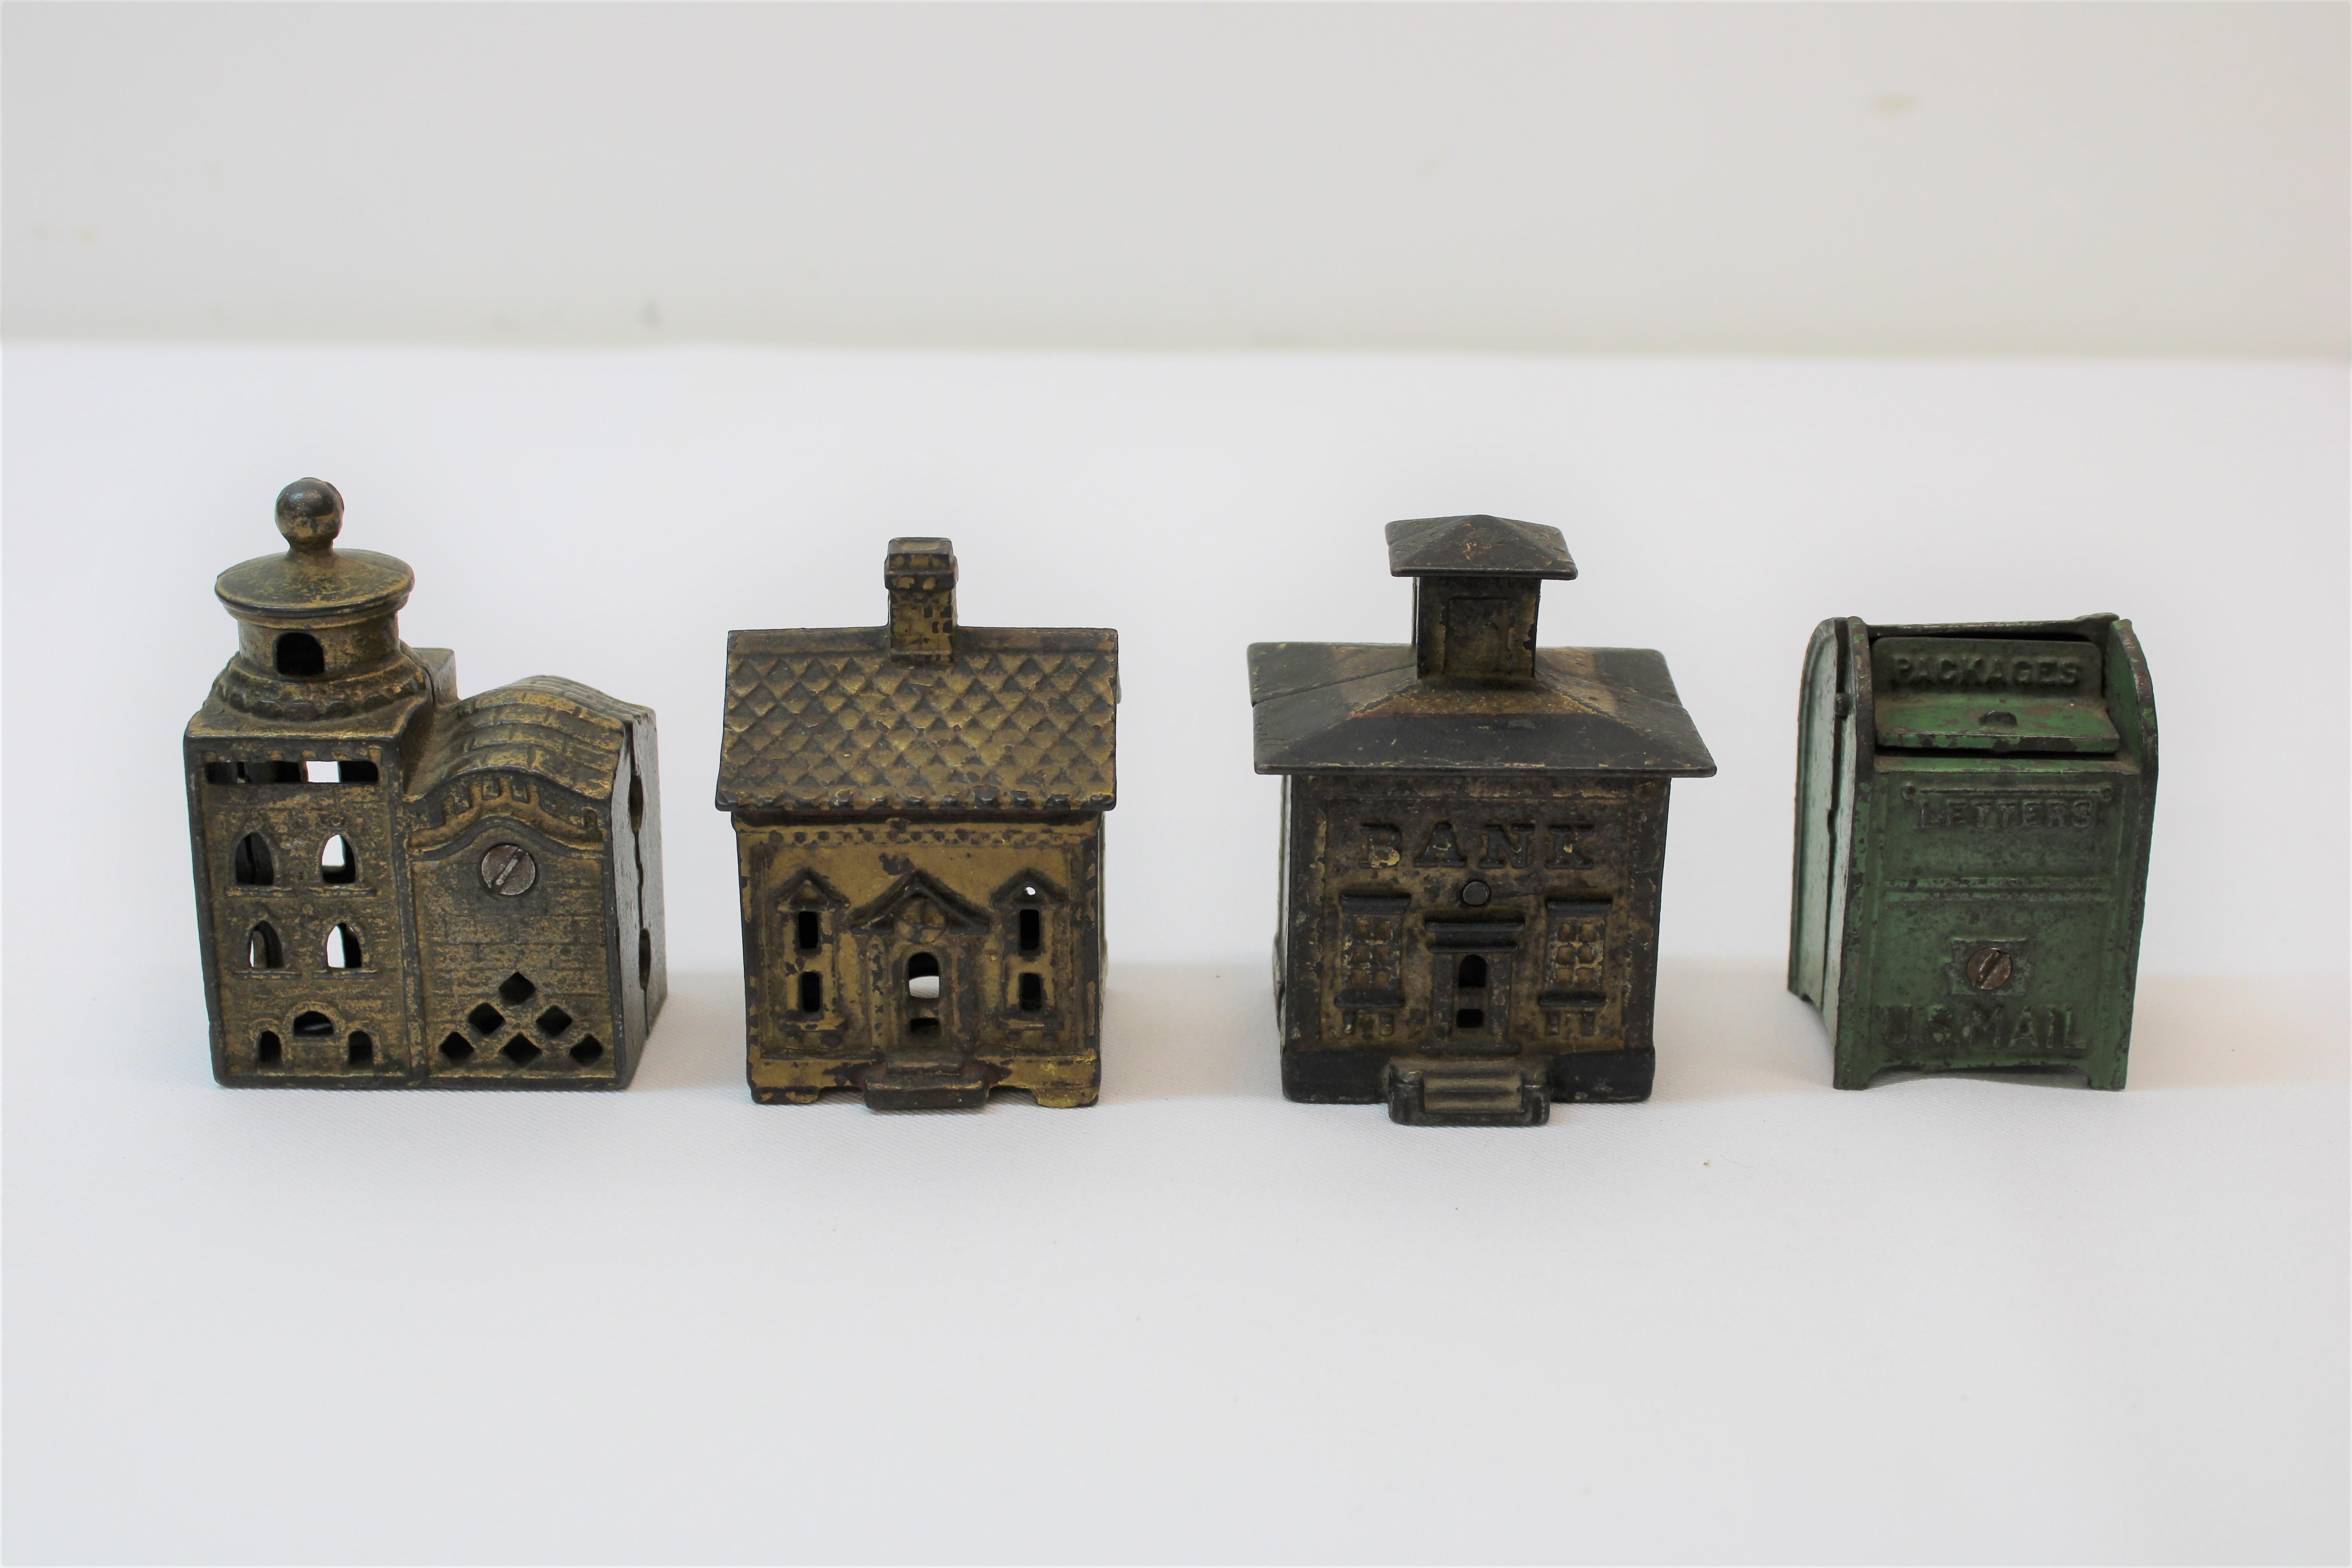 C. 19th century cast iron banks ( set of 4 )

Measurements of items individually 

Iron mailbox
Height - 2.50
Width - 1.75

Iron bank
Height - 3.25
Width - 2.75

Iron palace 
Height - 3.50
Width - 2.50

Iron church
Height -